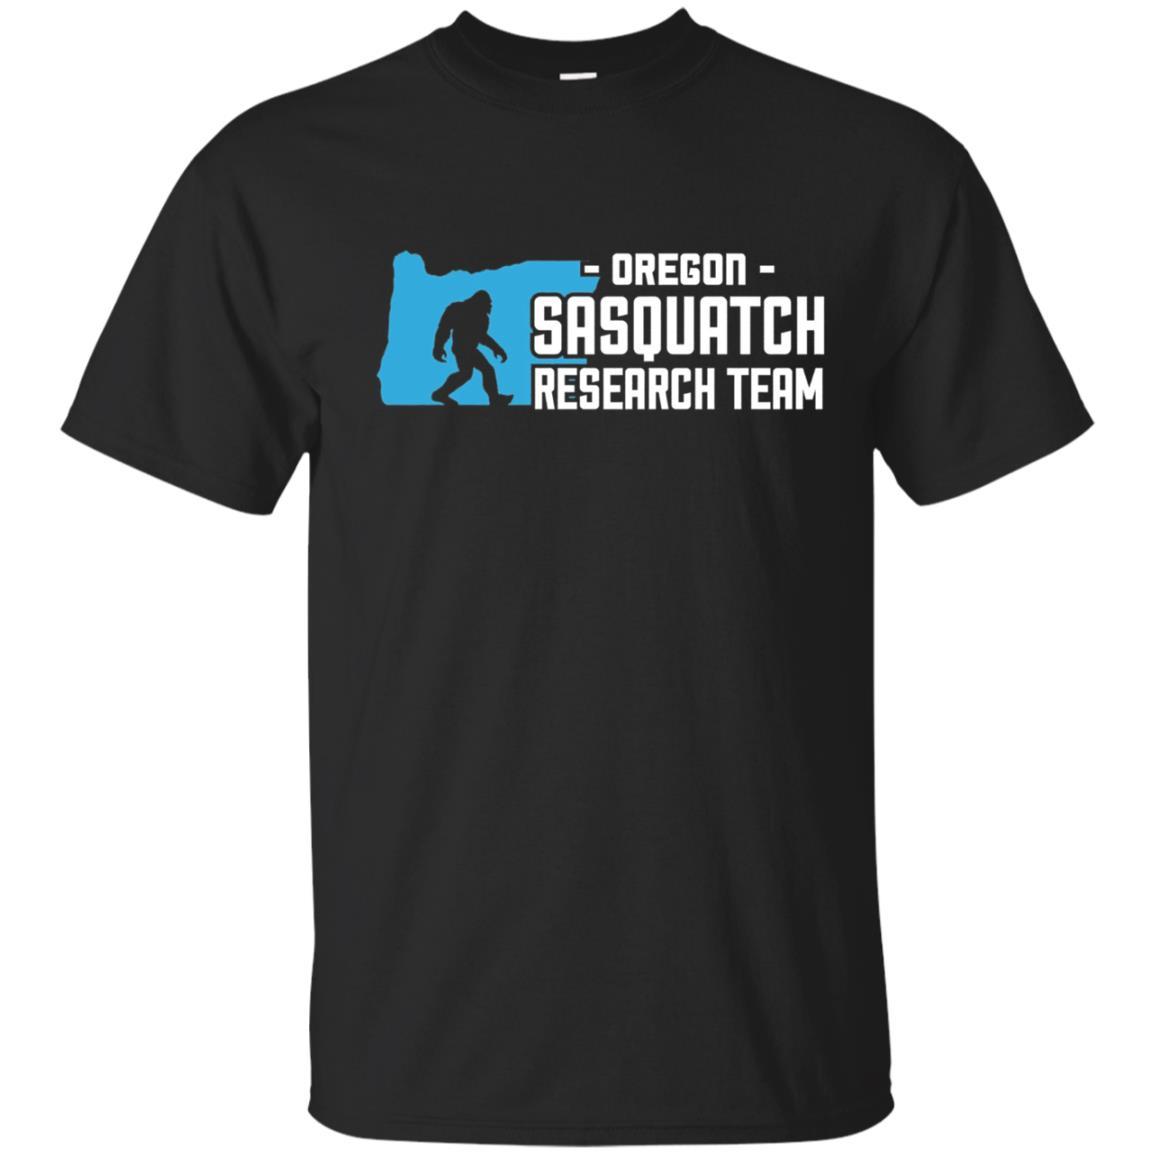 Cover Your Body With Amazing Oregon Bigfoo Sasquatch Research Team T Shirt